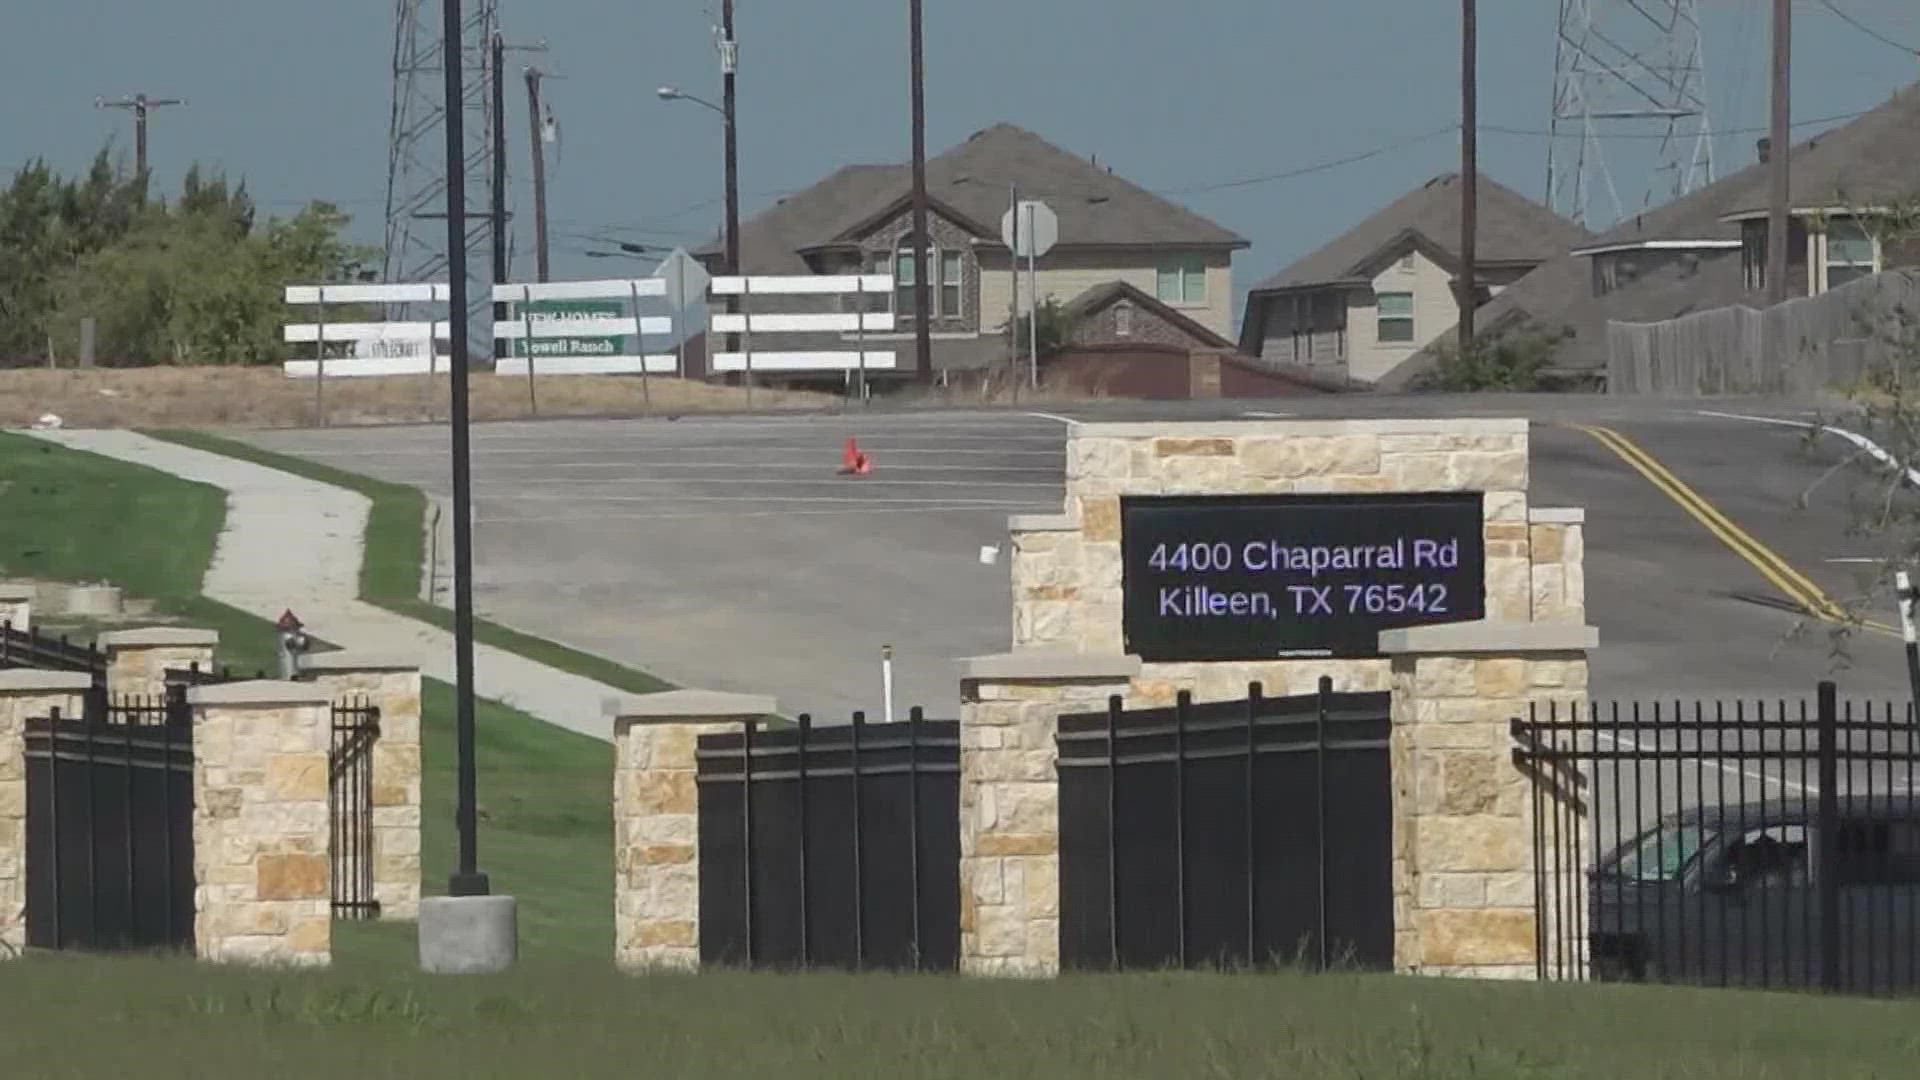 Find out what students can expect to see from Killeen ISD's newest high school campus in a sneak peak of Chaparral High School from 6News reporter Meredith Haas.